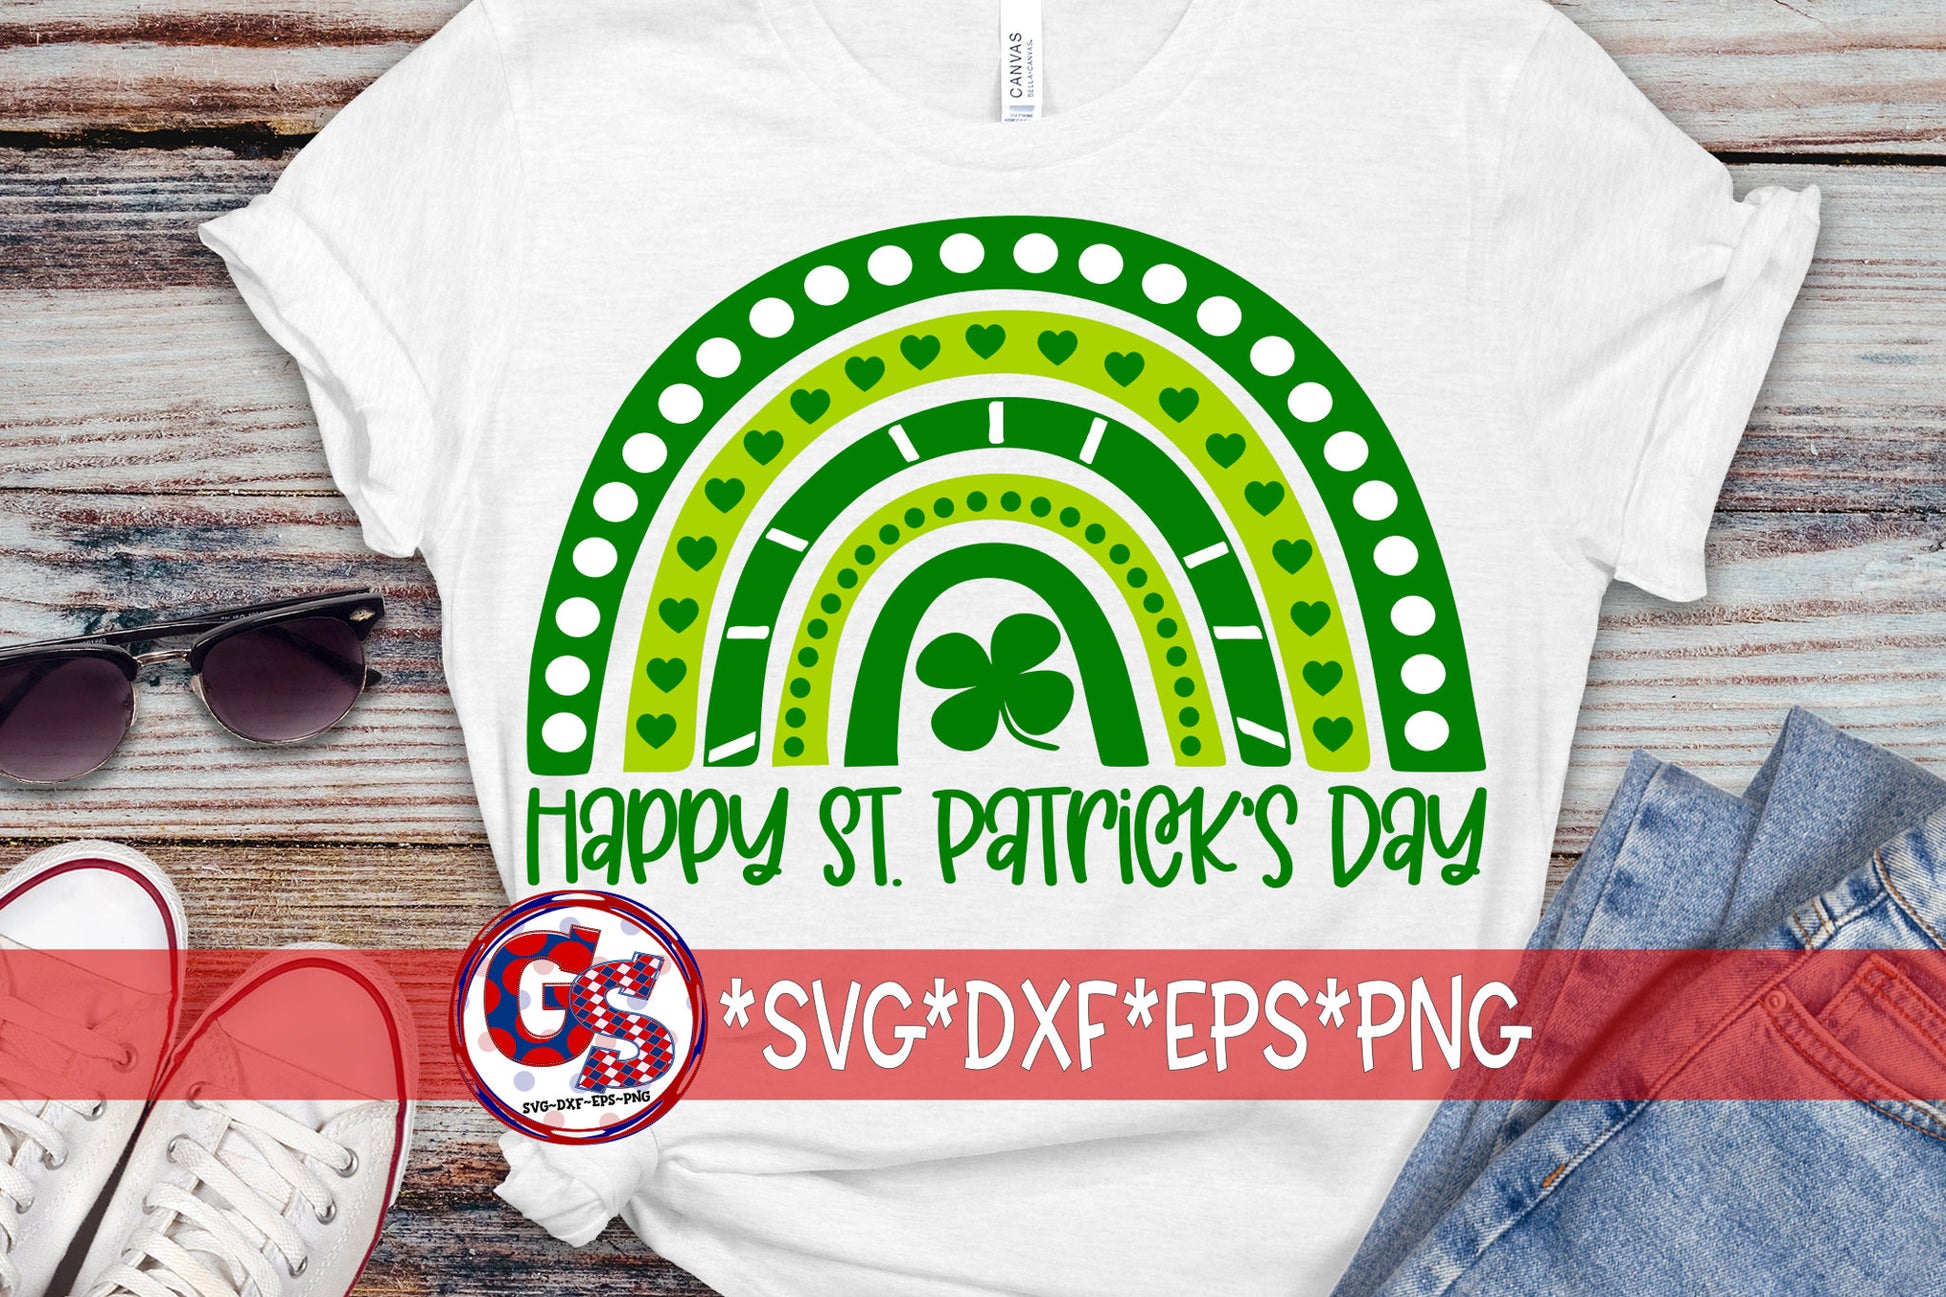 St Patrick&#39;s Day Rainbow svg dxf eps png. St Patrick&#39;s Day SVG | St Paddy&#39;s SVG | Green Rainbow SVG | Rainbow SvG |Instant Download Cut File